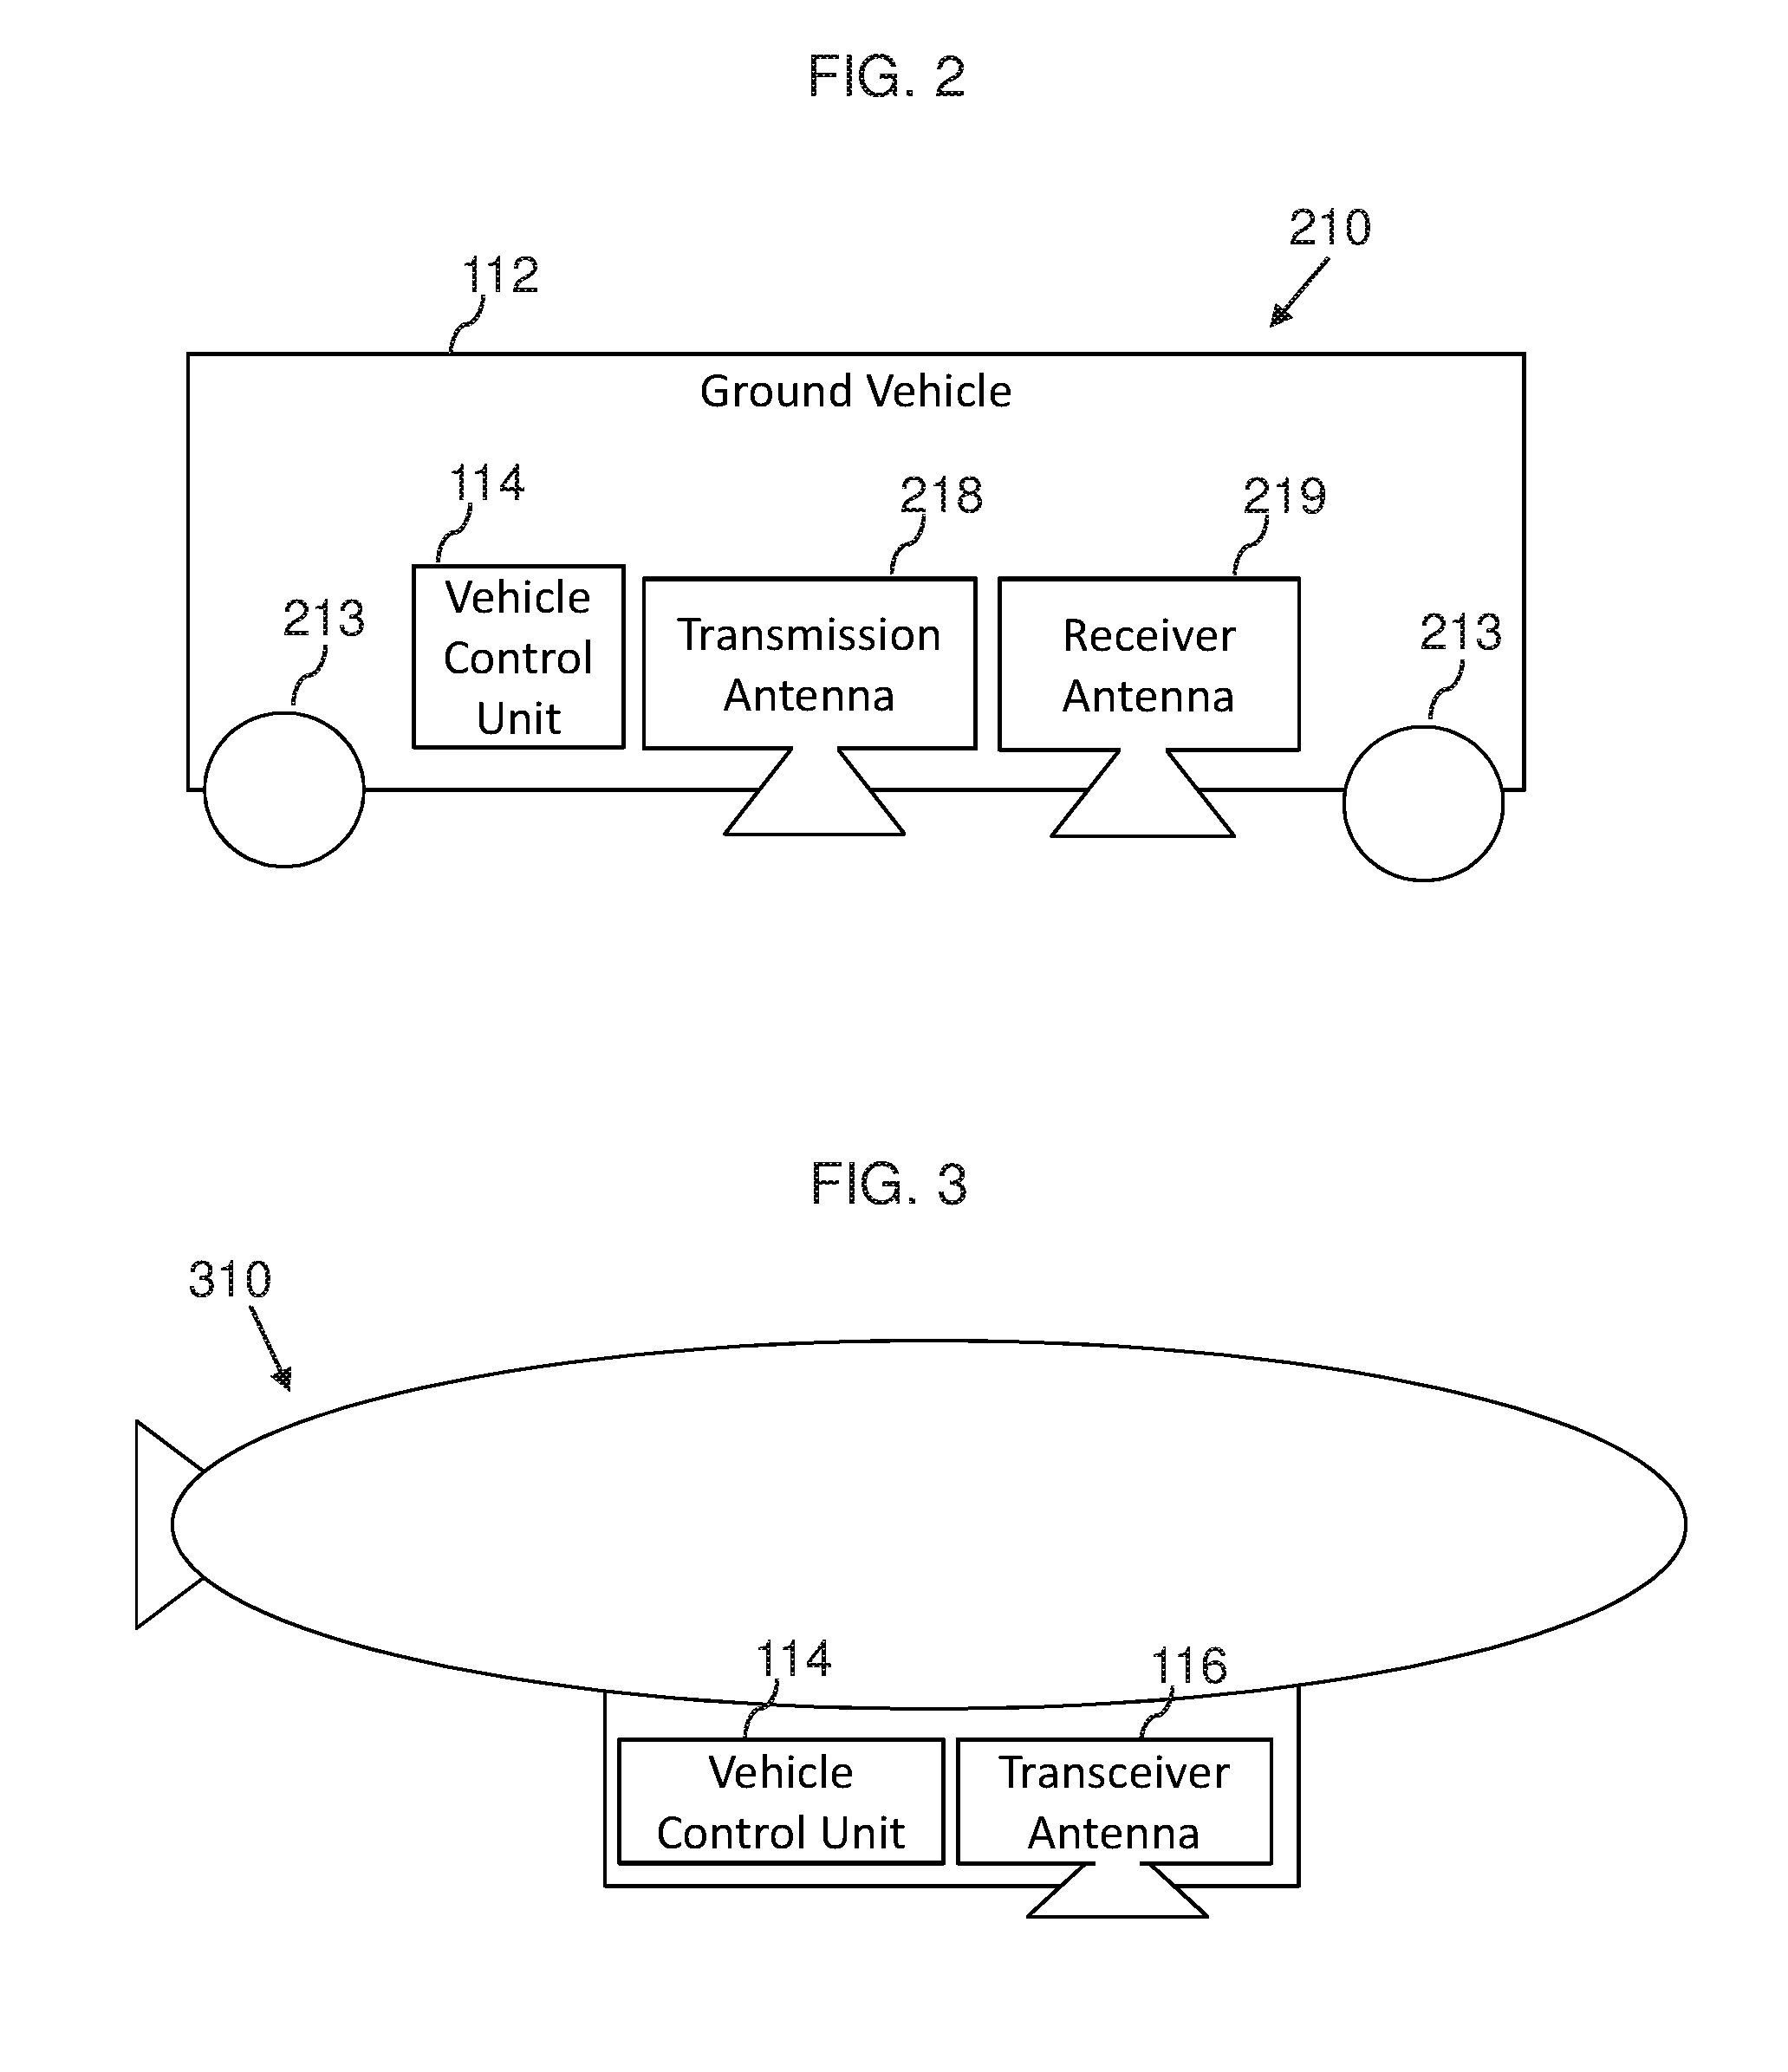 System, apparatus, and method for remote soil moisture measurement and control